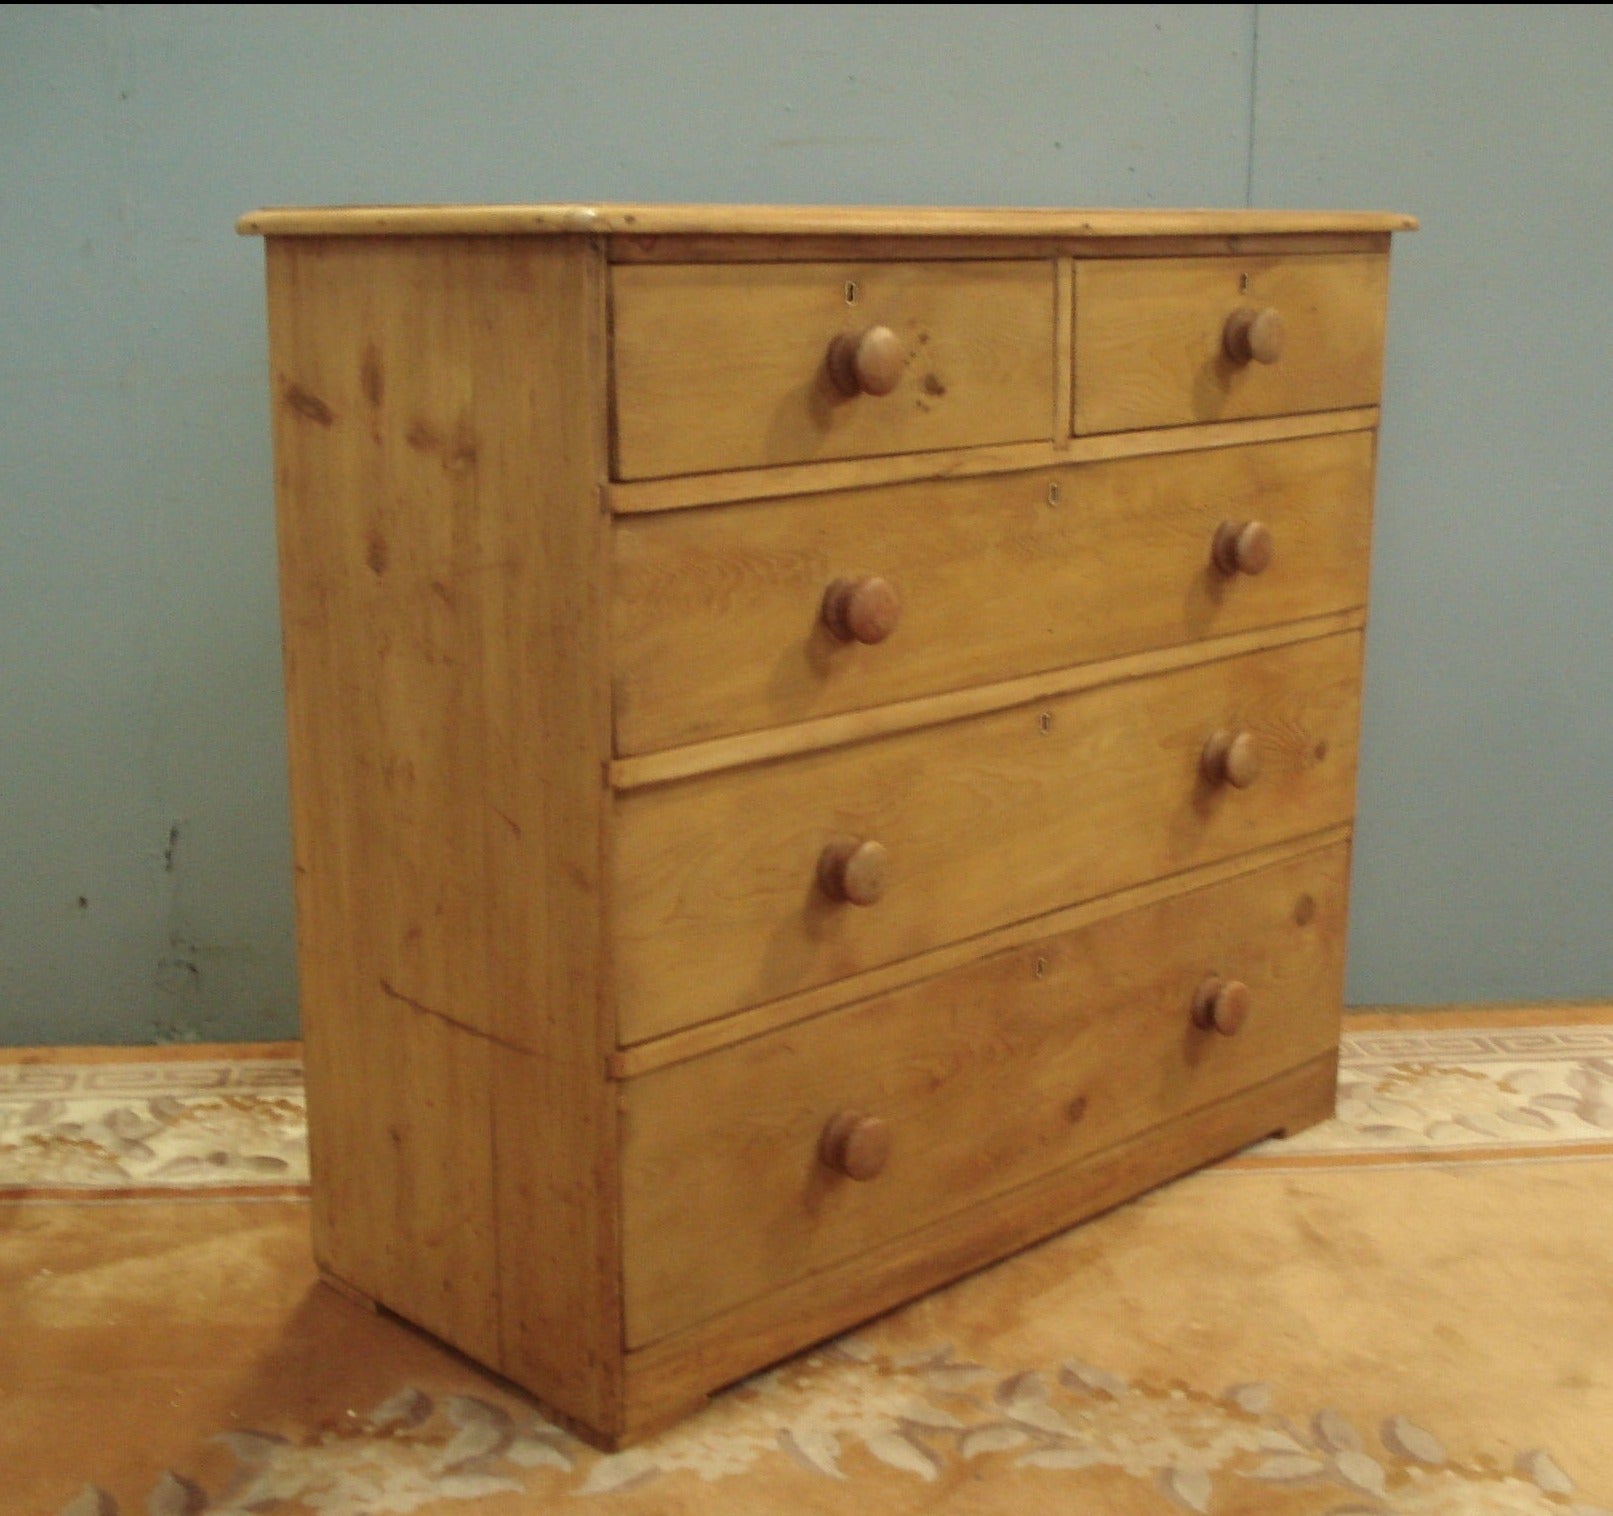 Original turned knobs to this C19th pine Five Drawer Chest